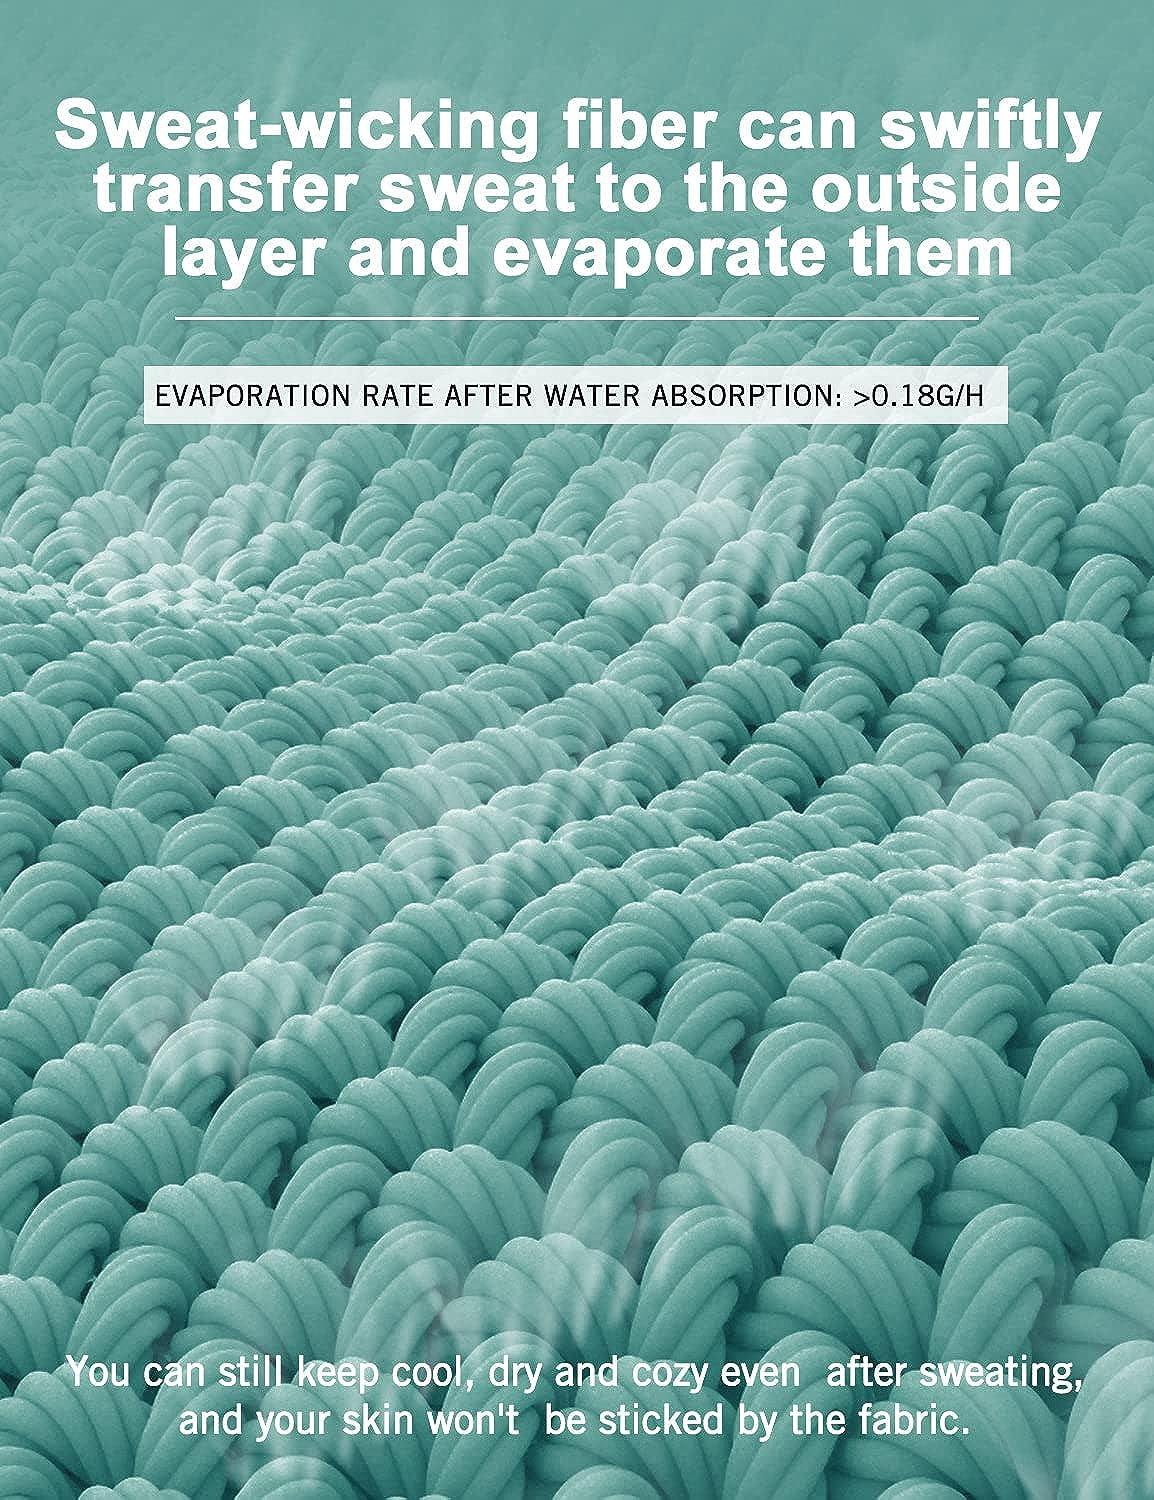 Moisture absorption in textiles - Backpacking Light